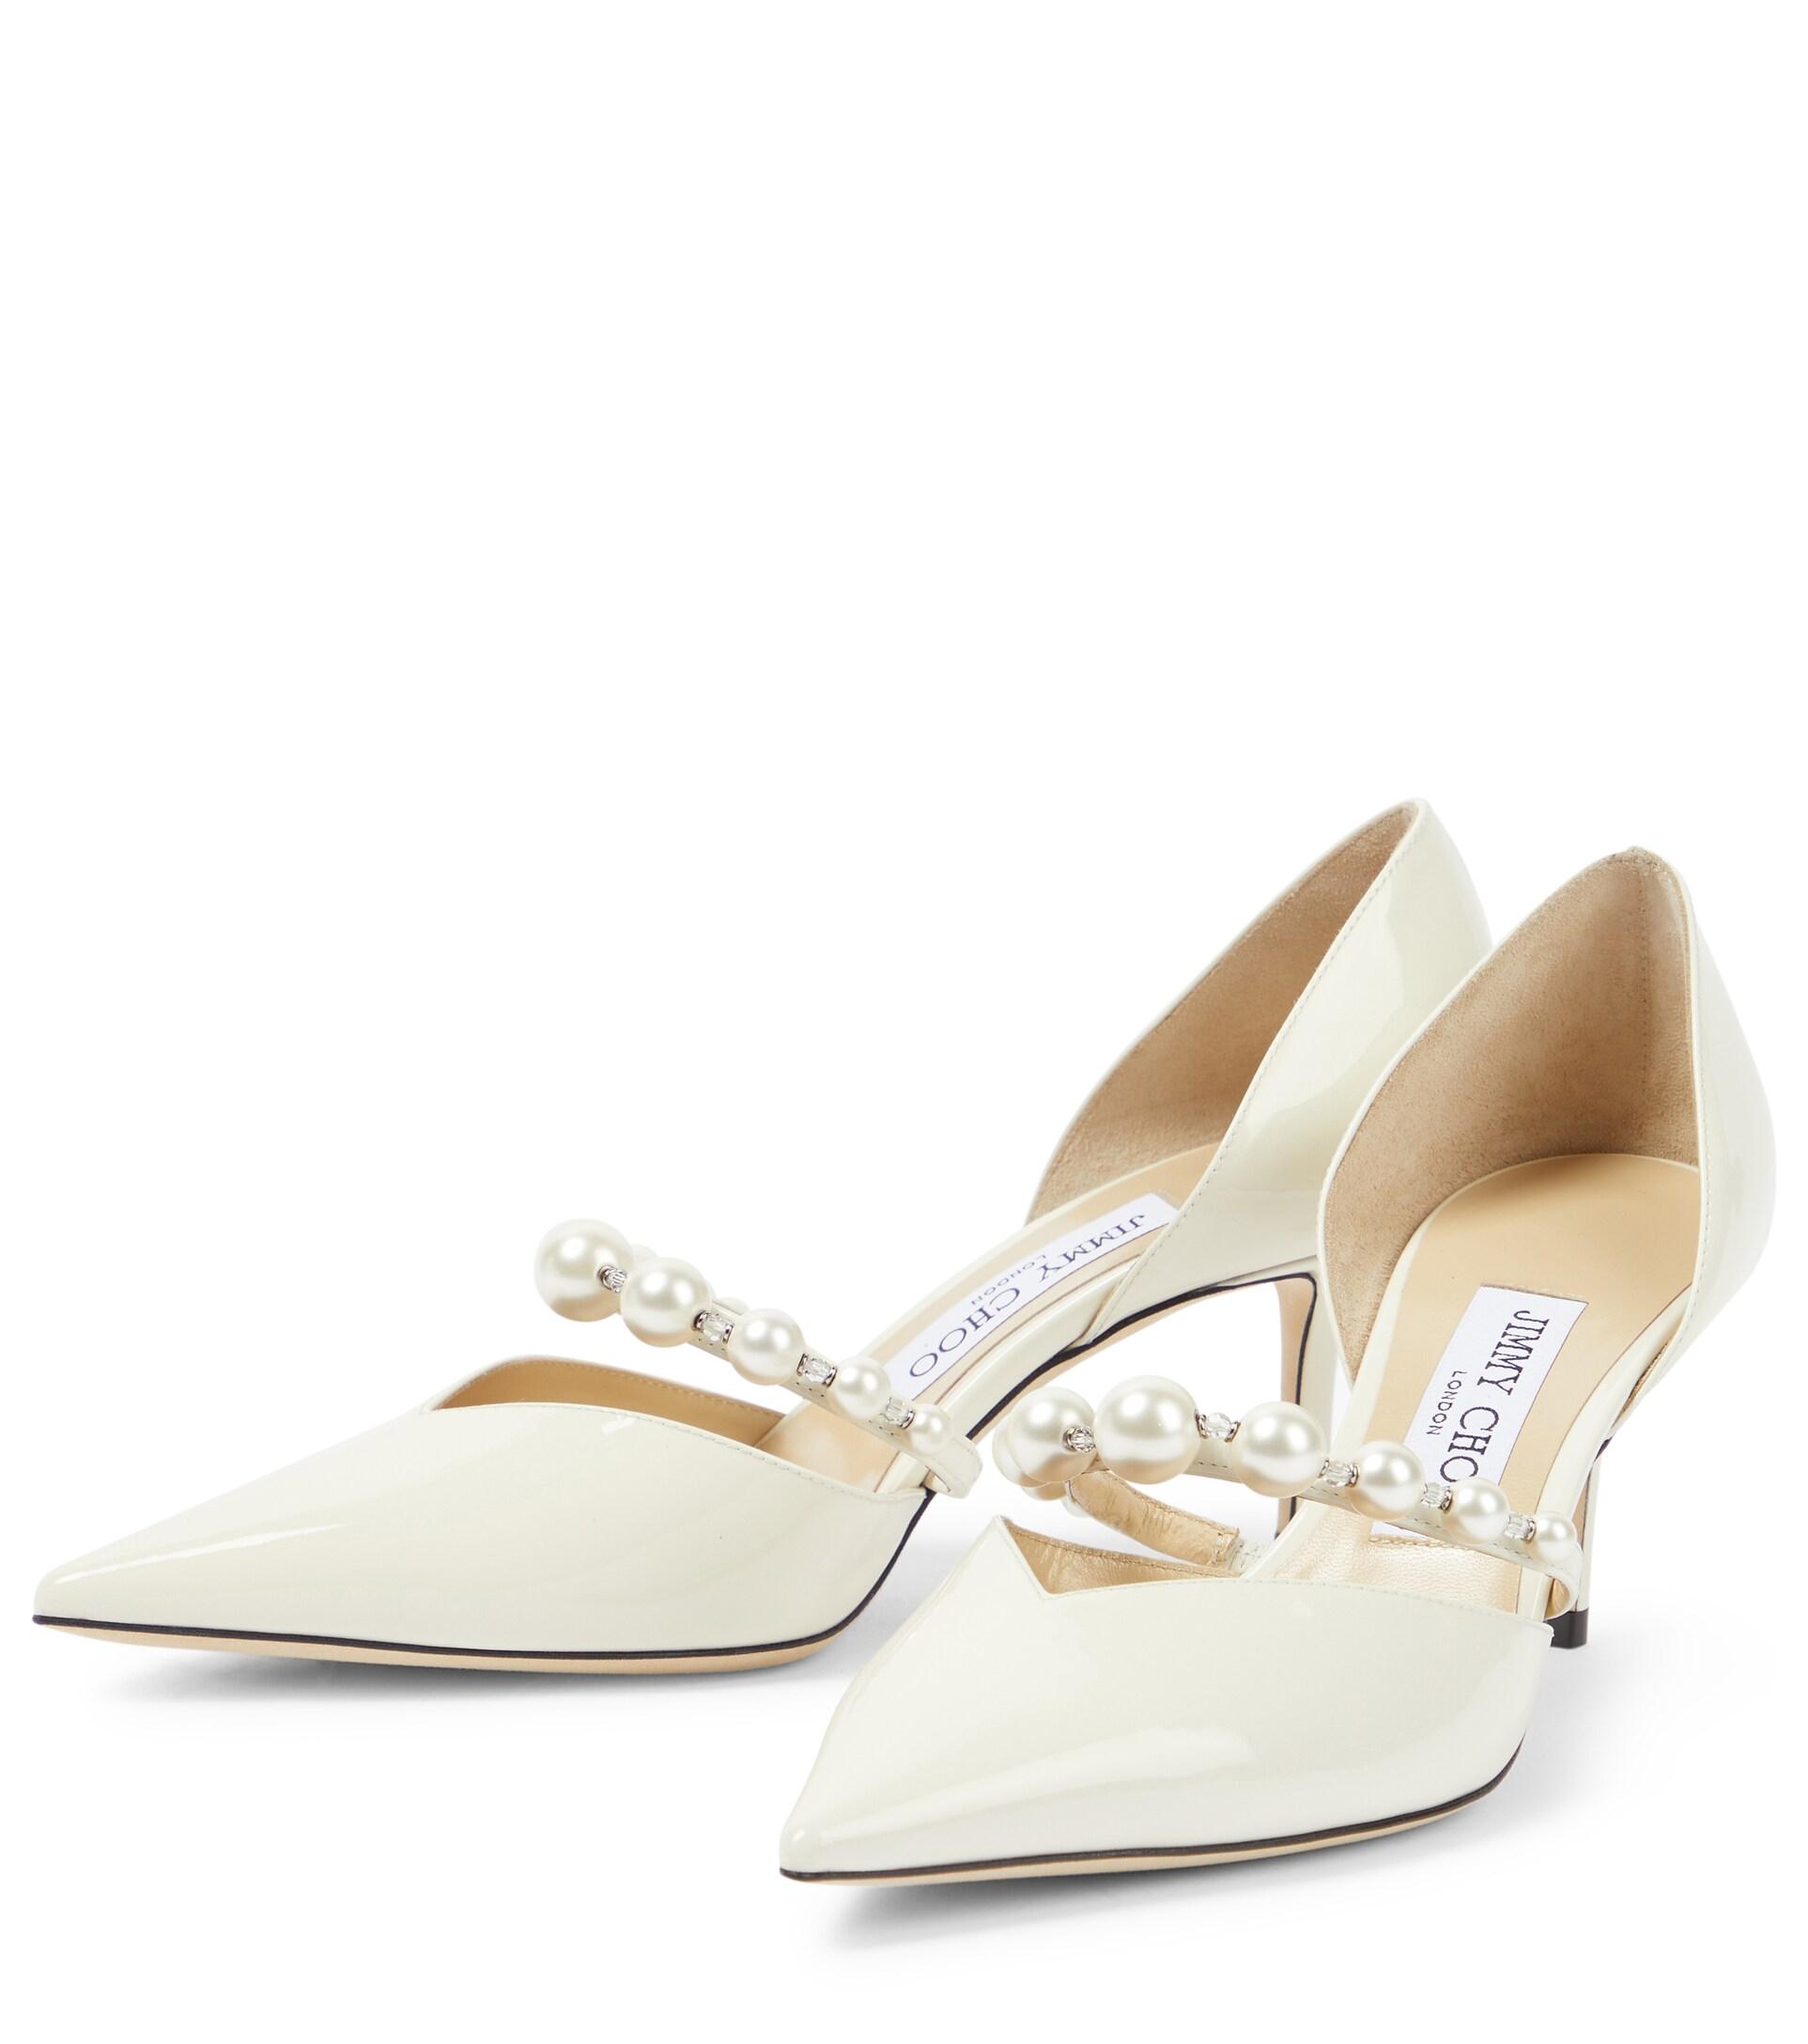 Jimmy Choo Aurelie 65 Patent Leather Pumps in White | Lyst